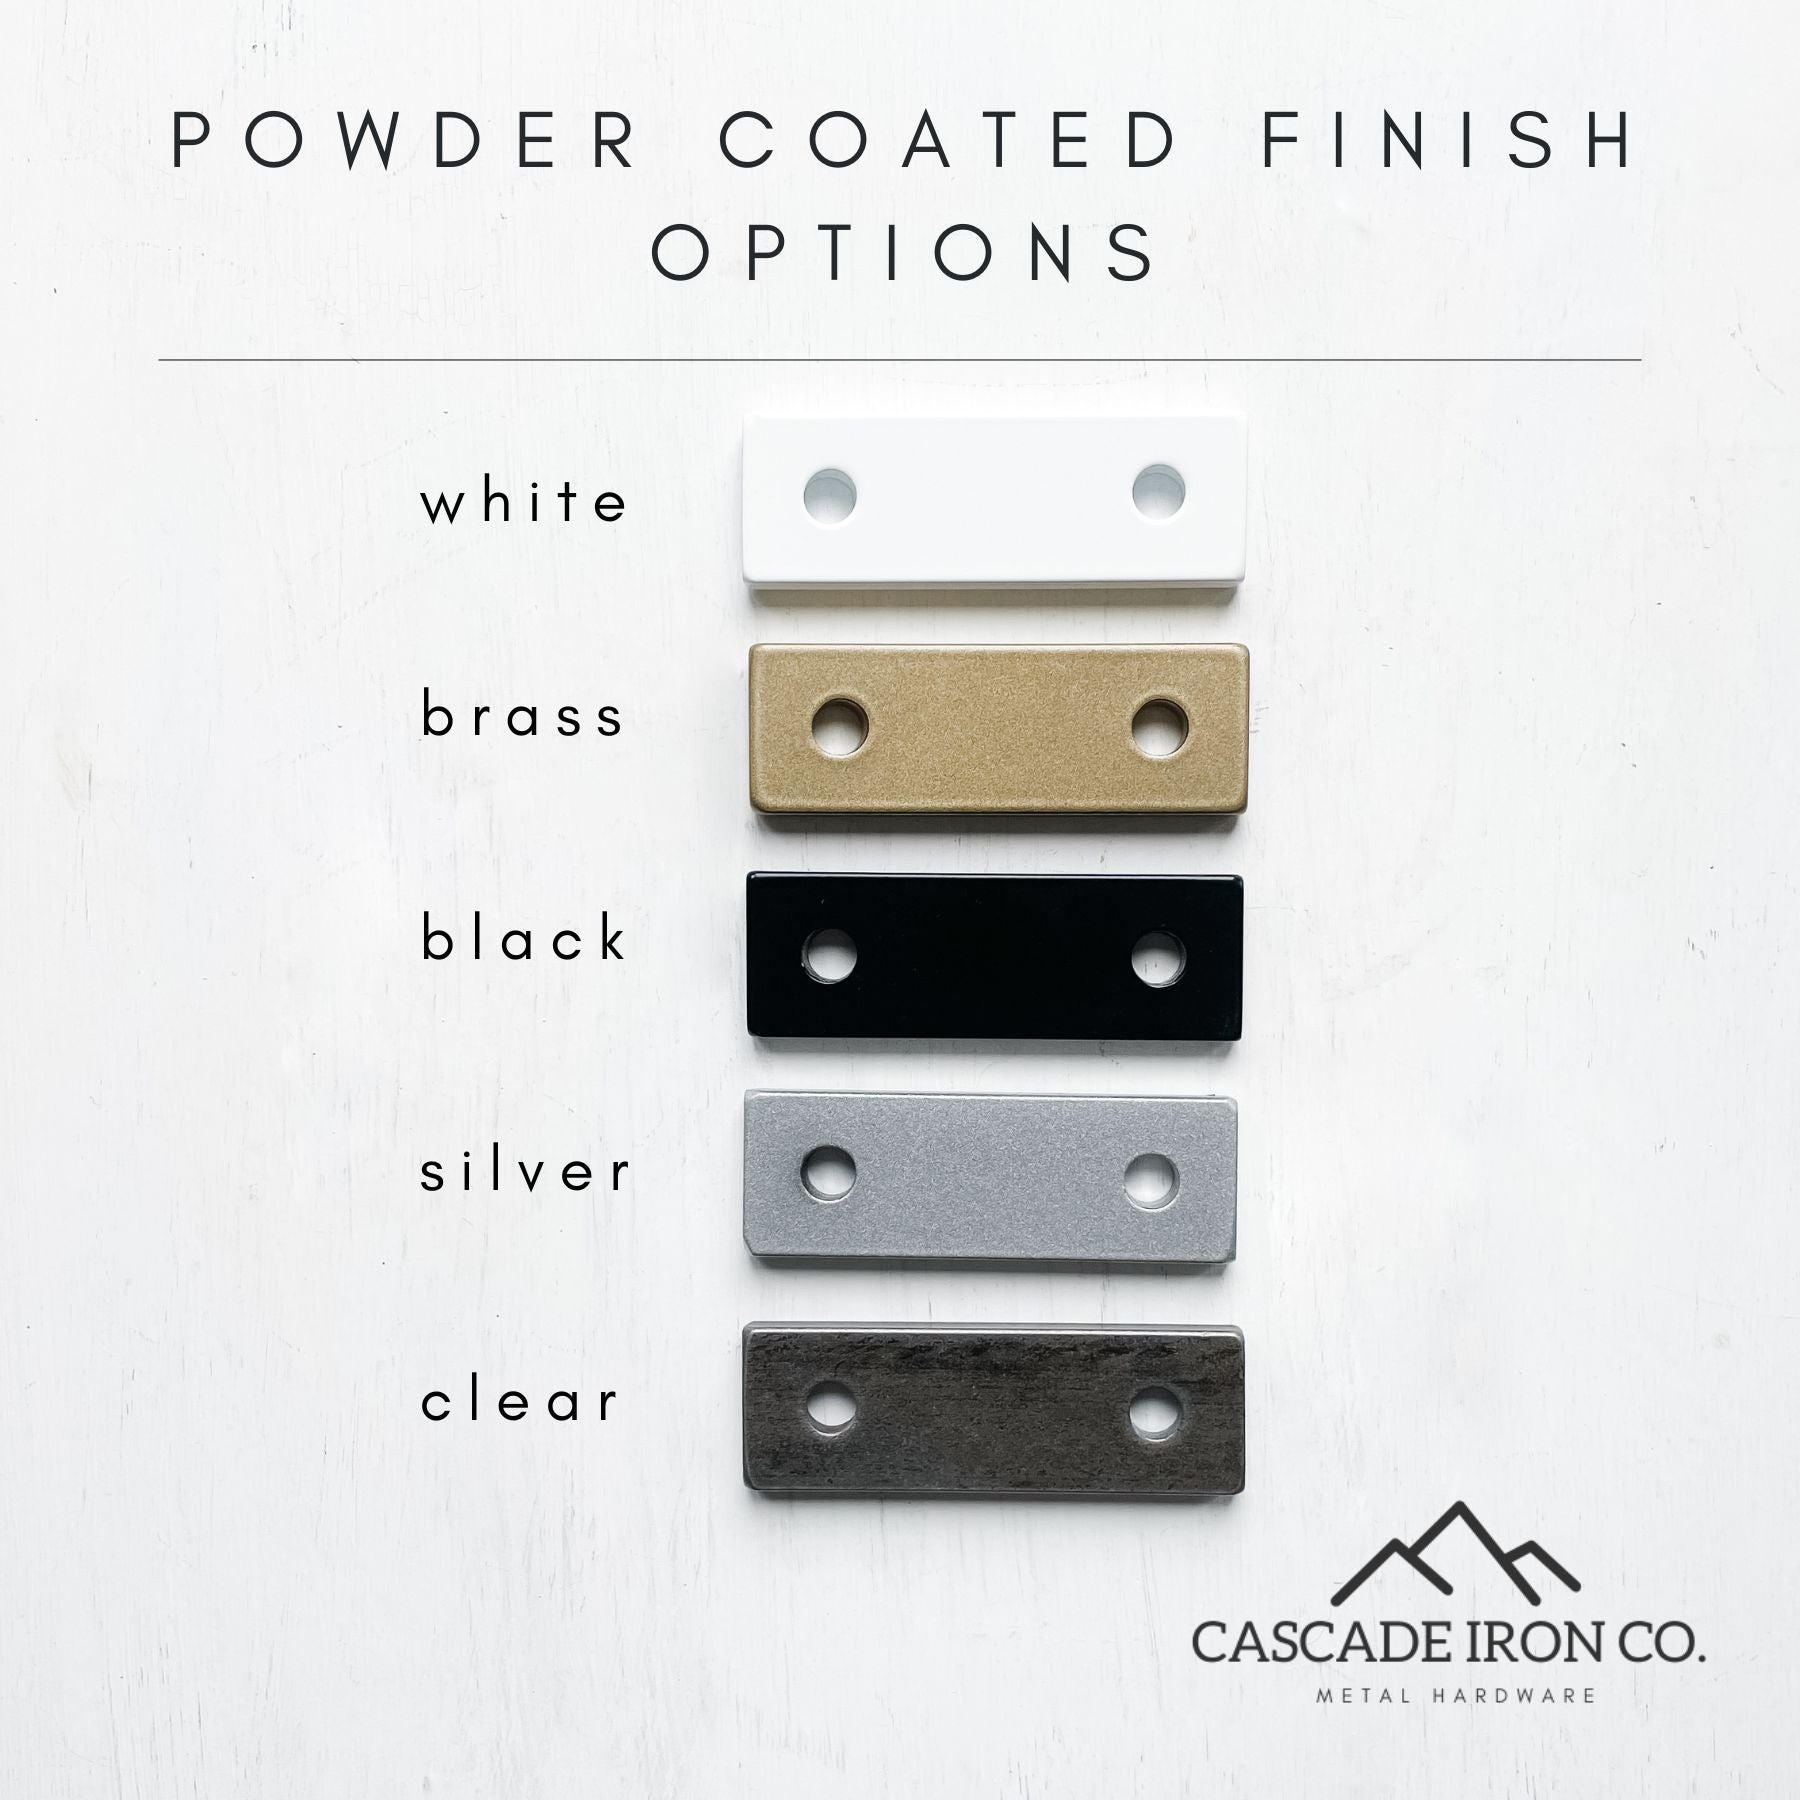 Cascade iron co. metal finishes: white, brass, black, silver, clear coated steel